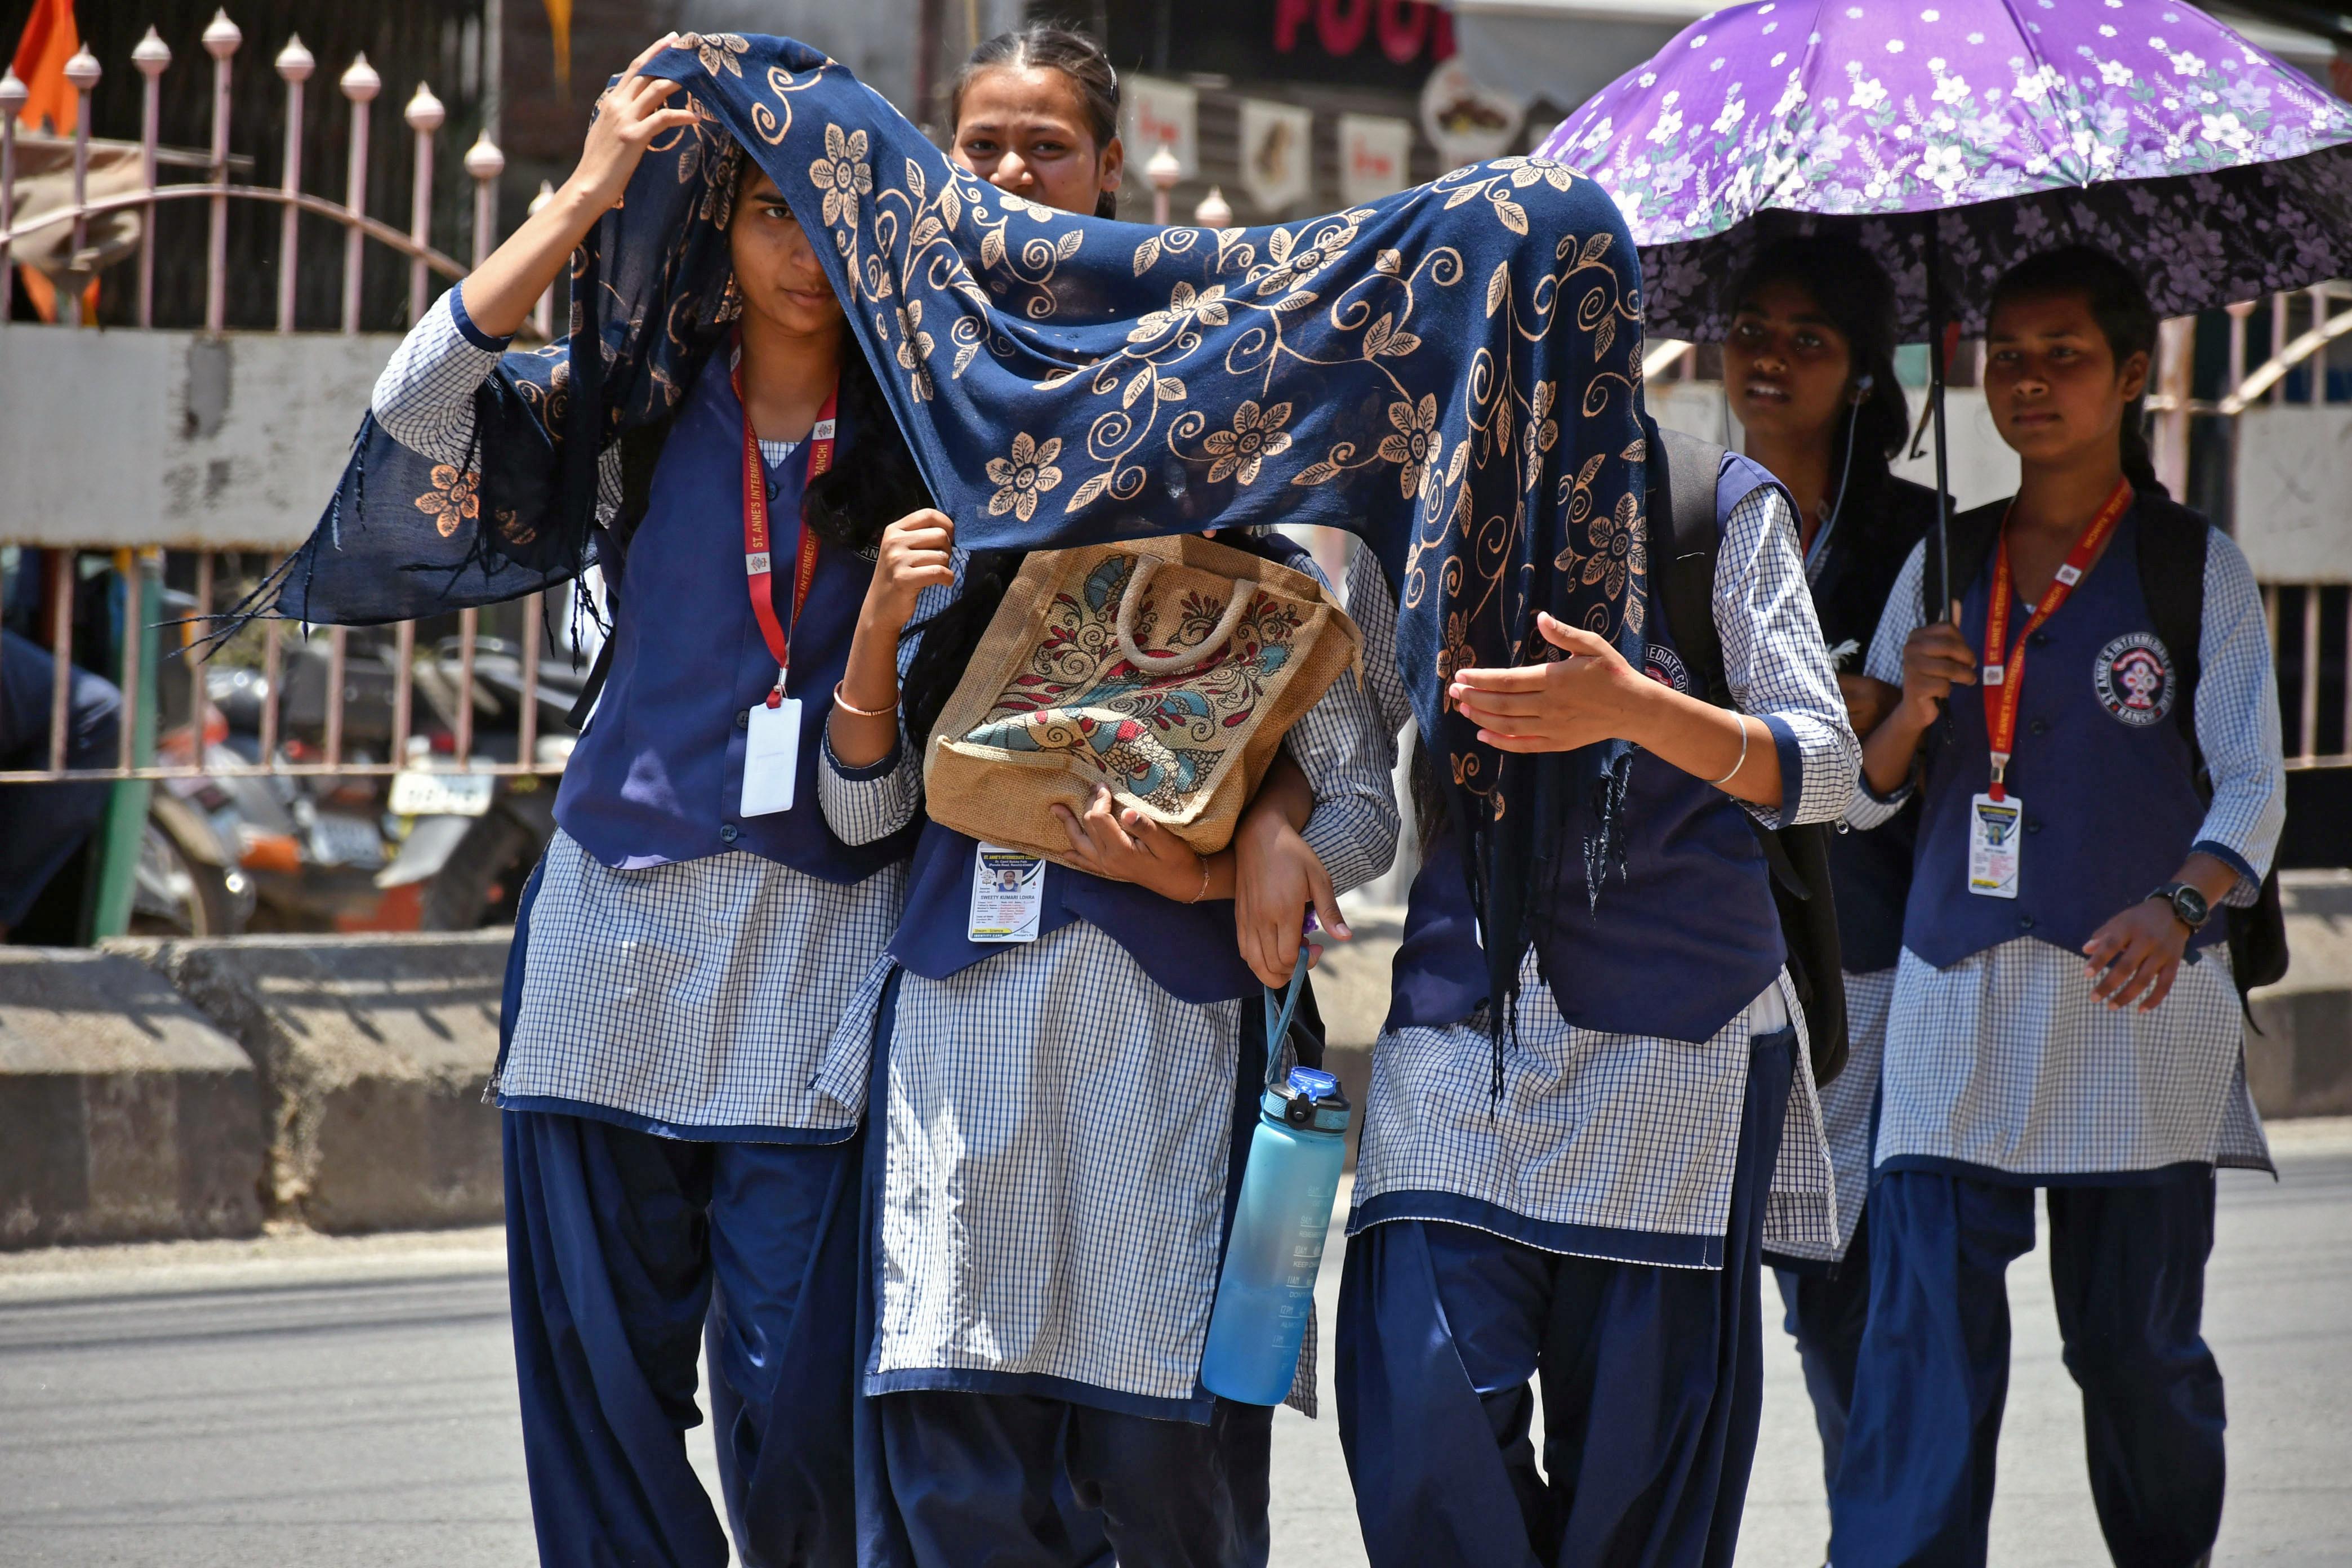 Students use umbrellas to protect themselves from the heat